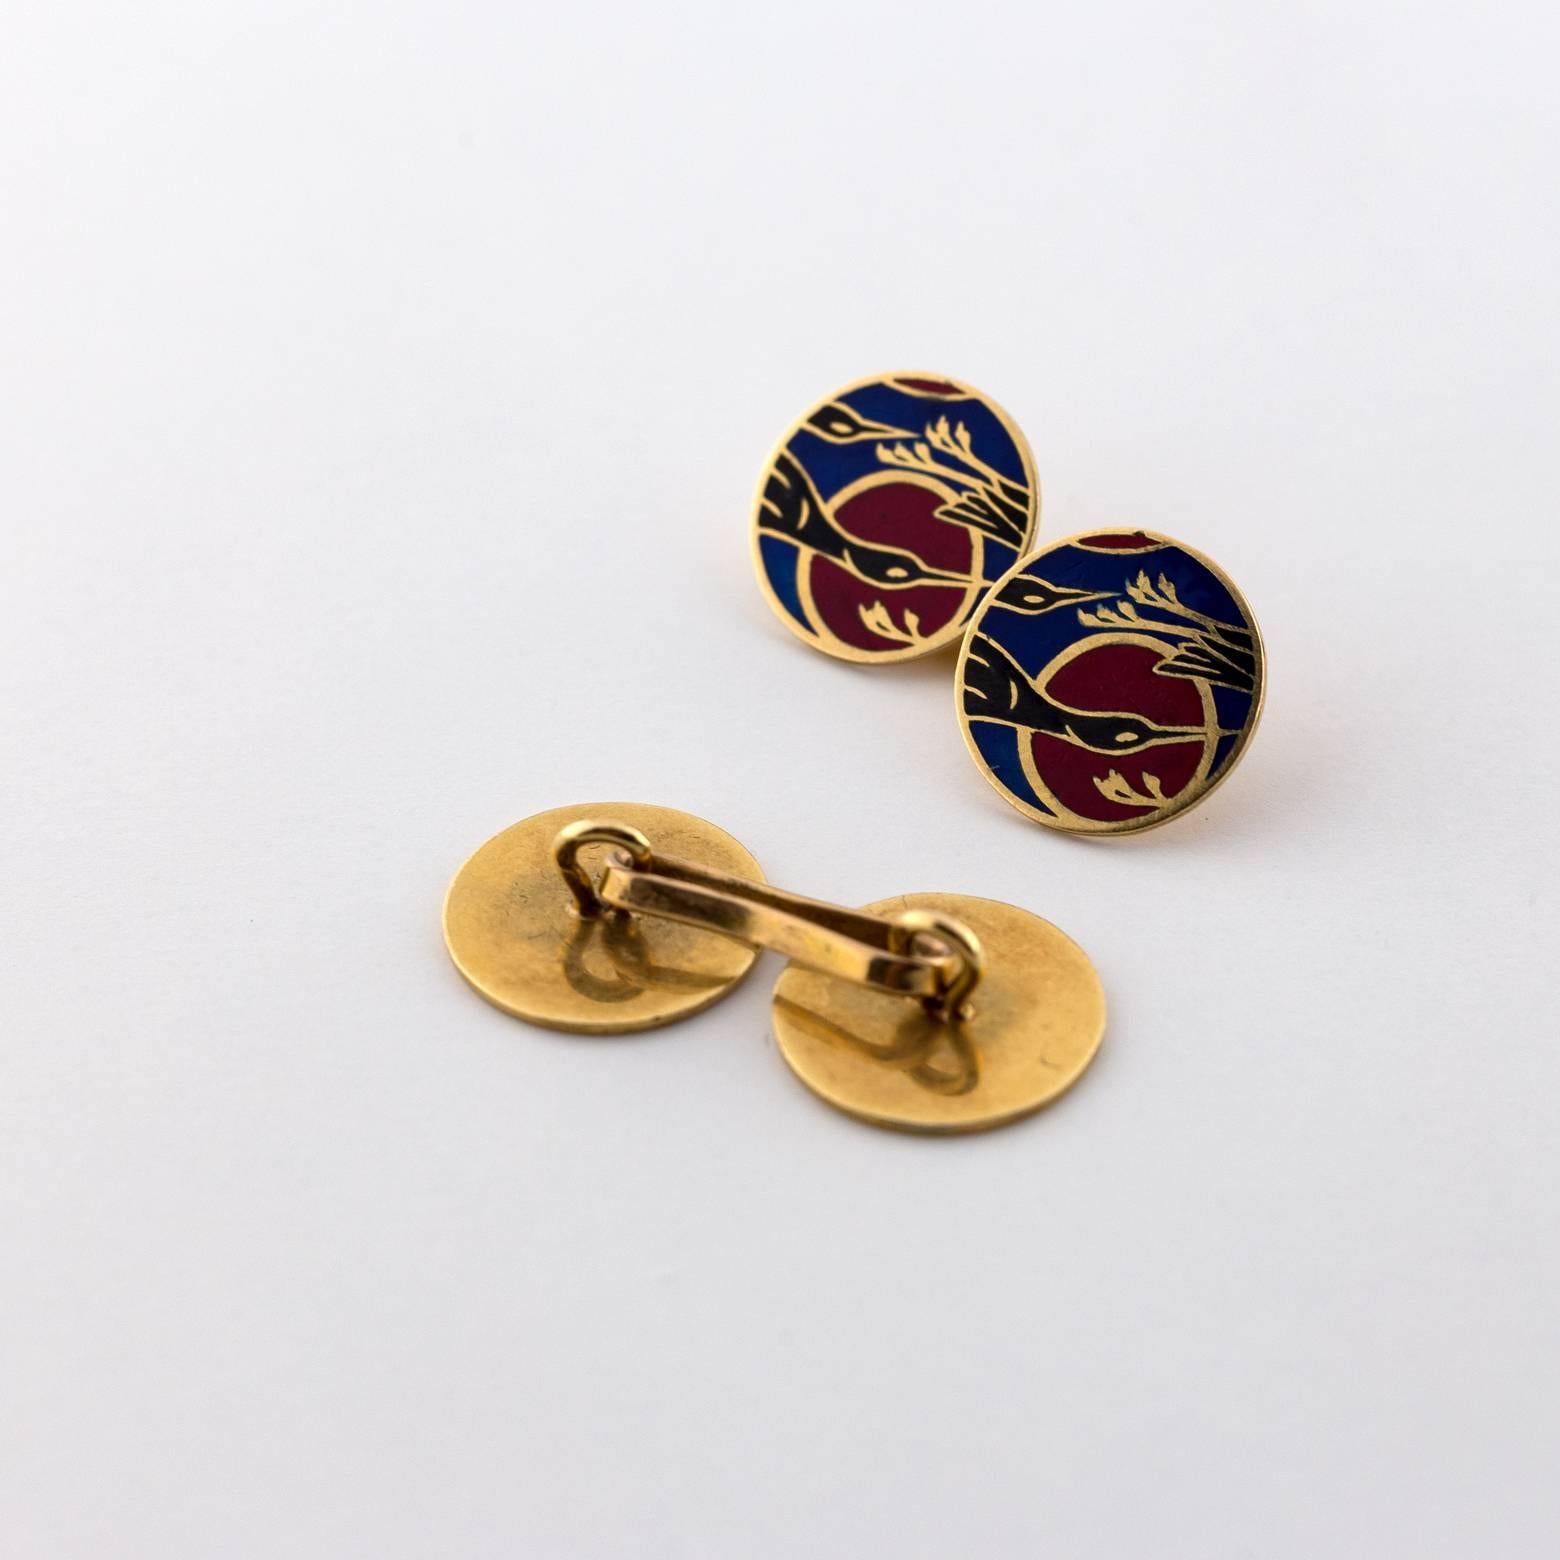 Art Deco French 18 Karat Yellow Gold Cufflinks with Enamel Cranes in Blue, Black and Red